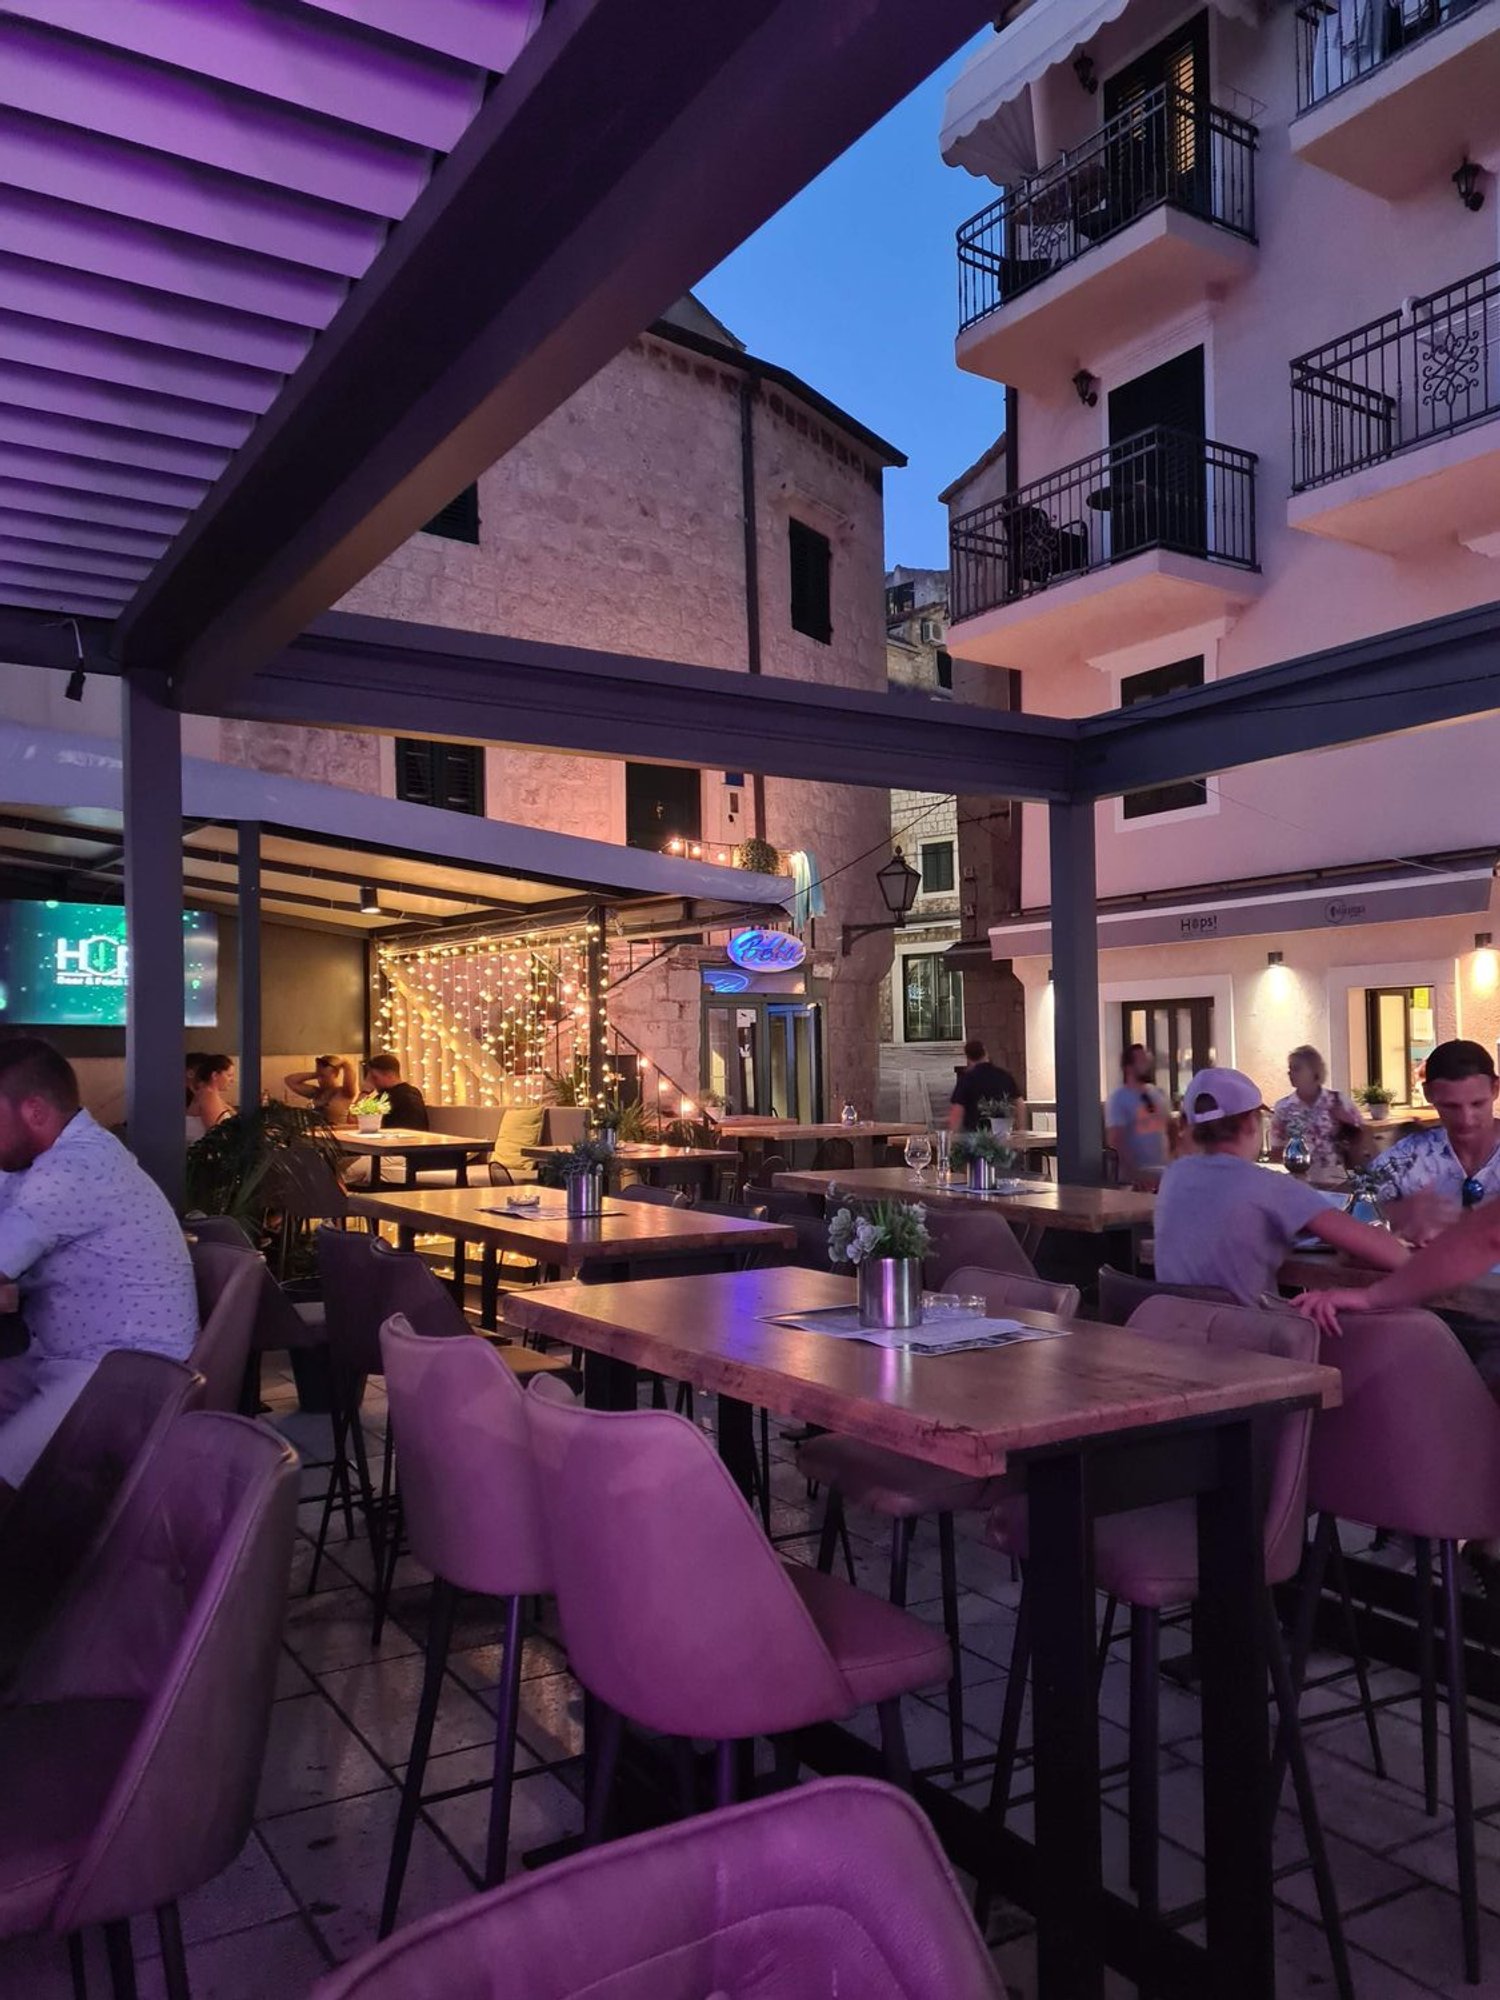 outdoor seating with purple lighting and people say at tables in a European town